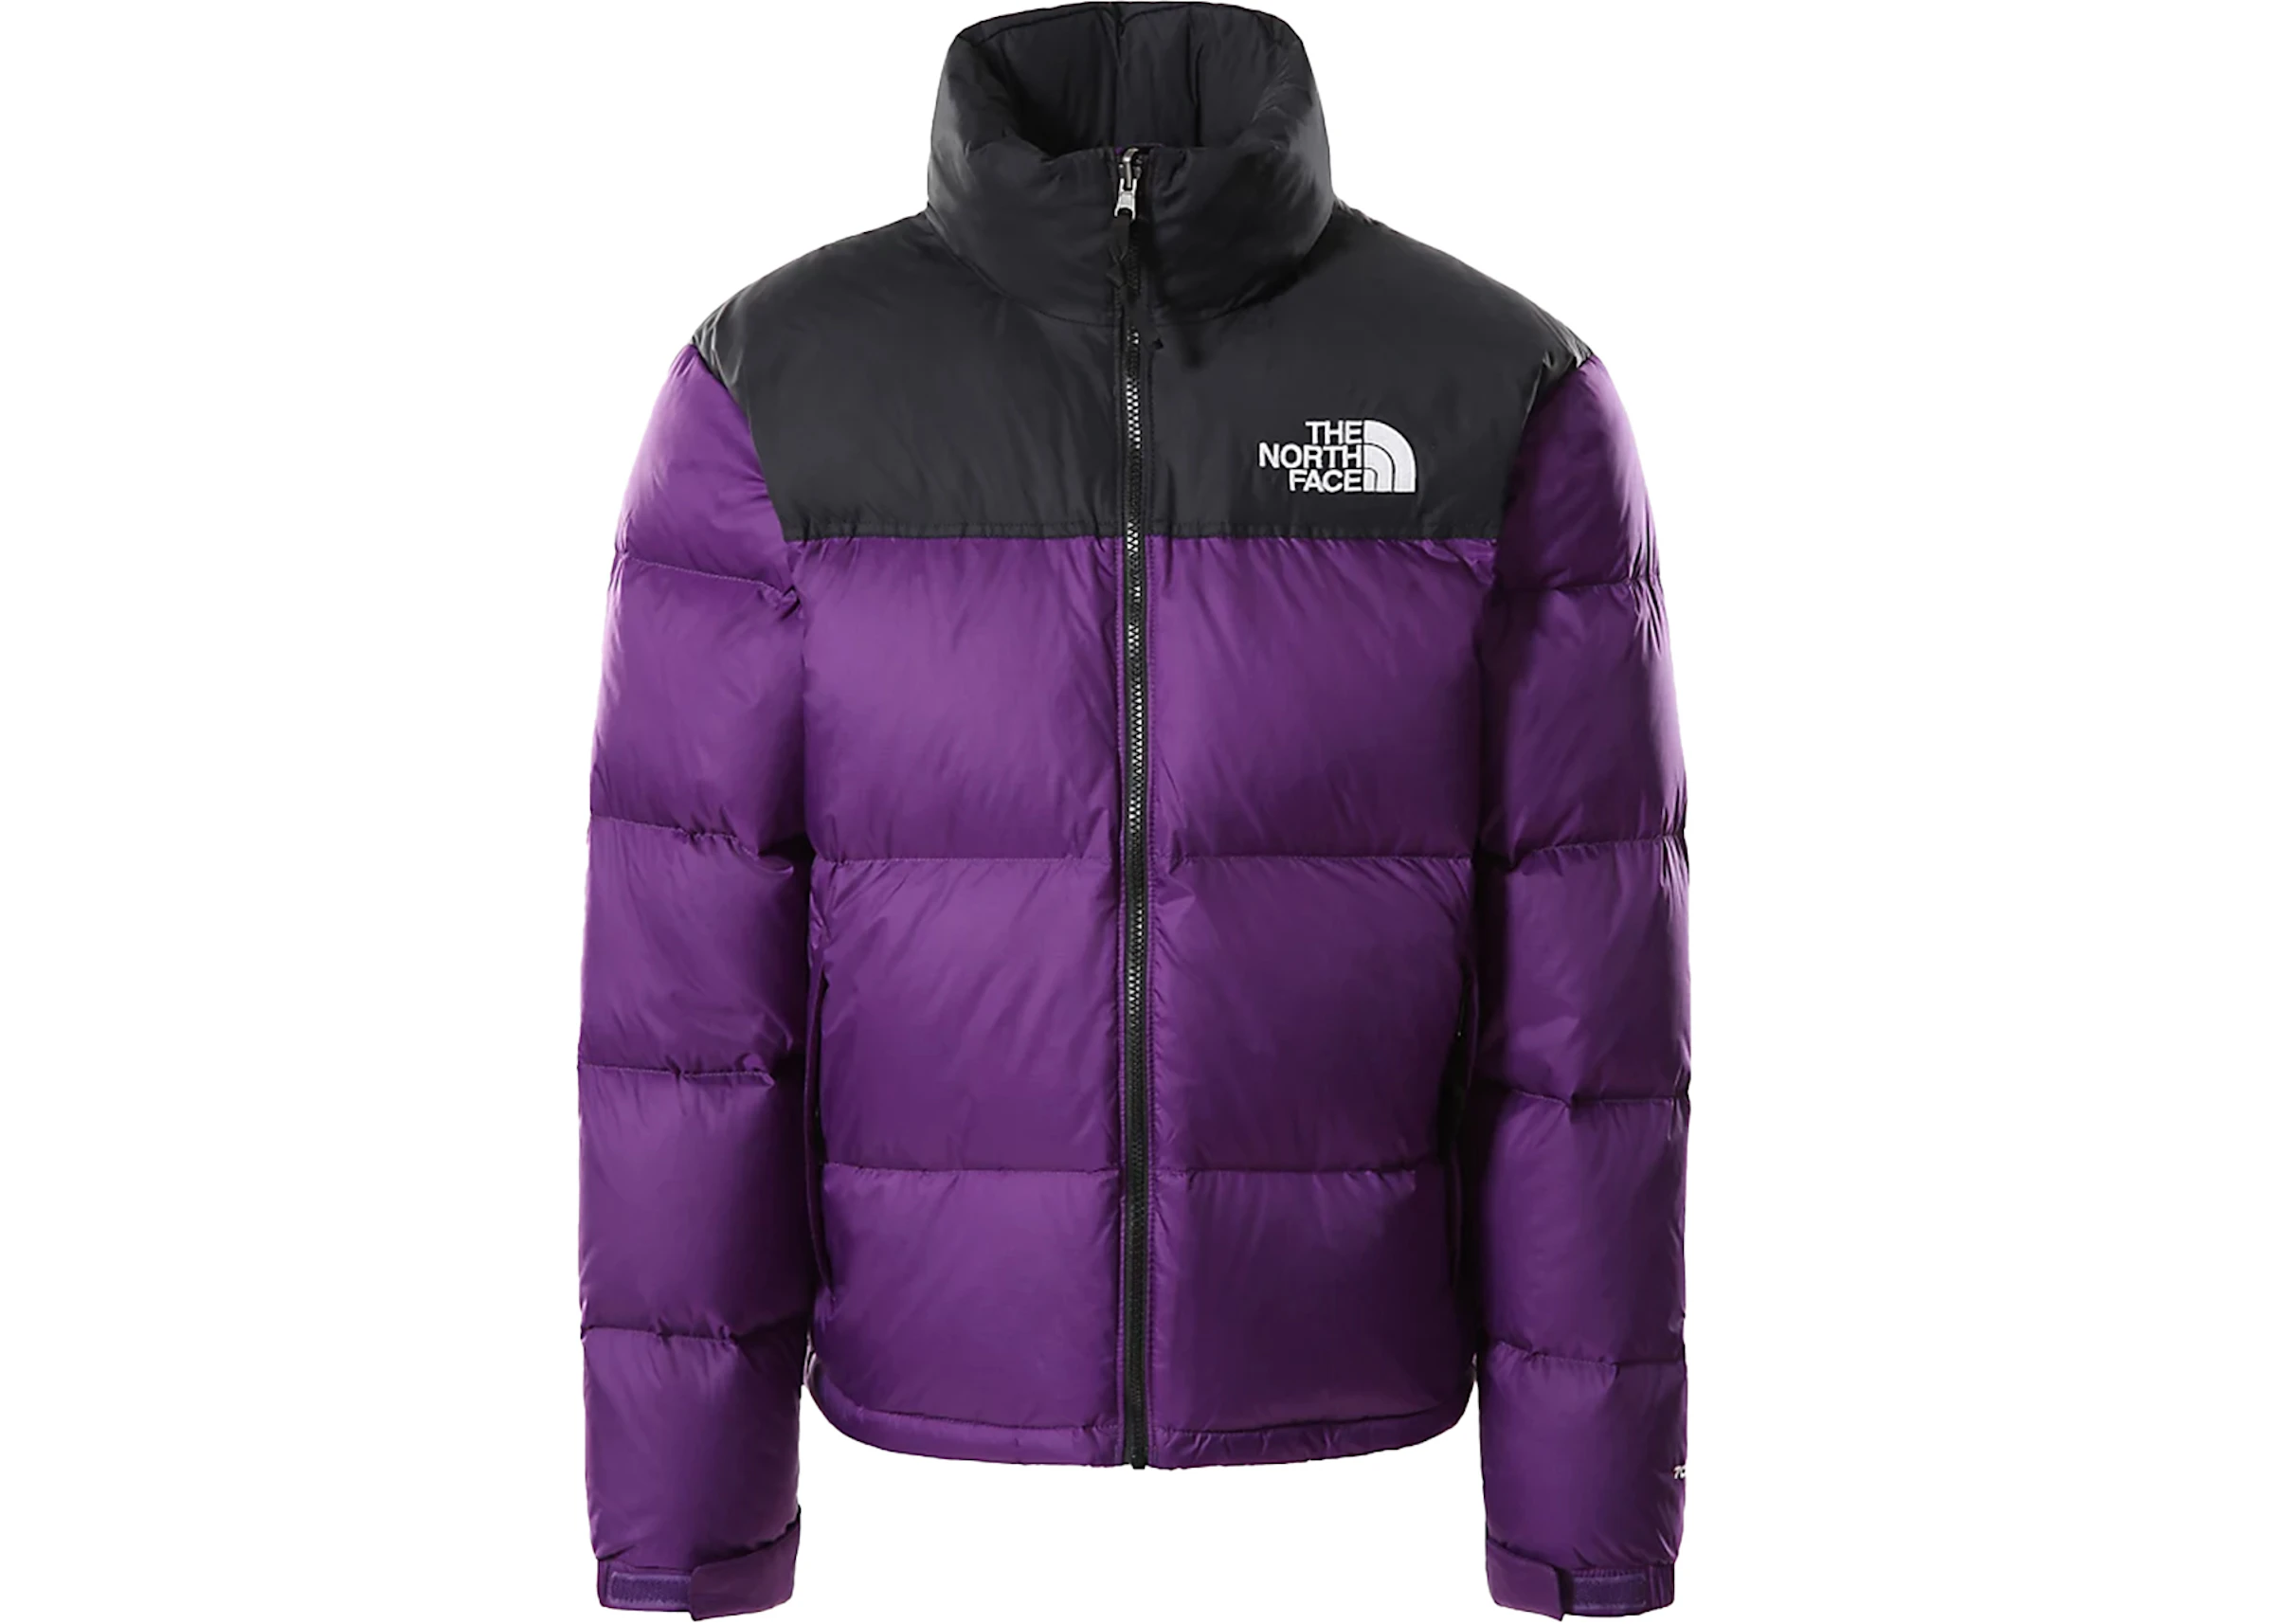 The North Face Jackets, Shirts More - StockX